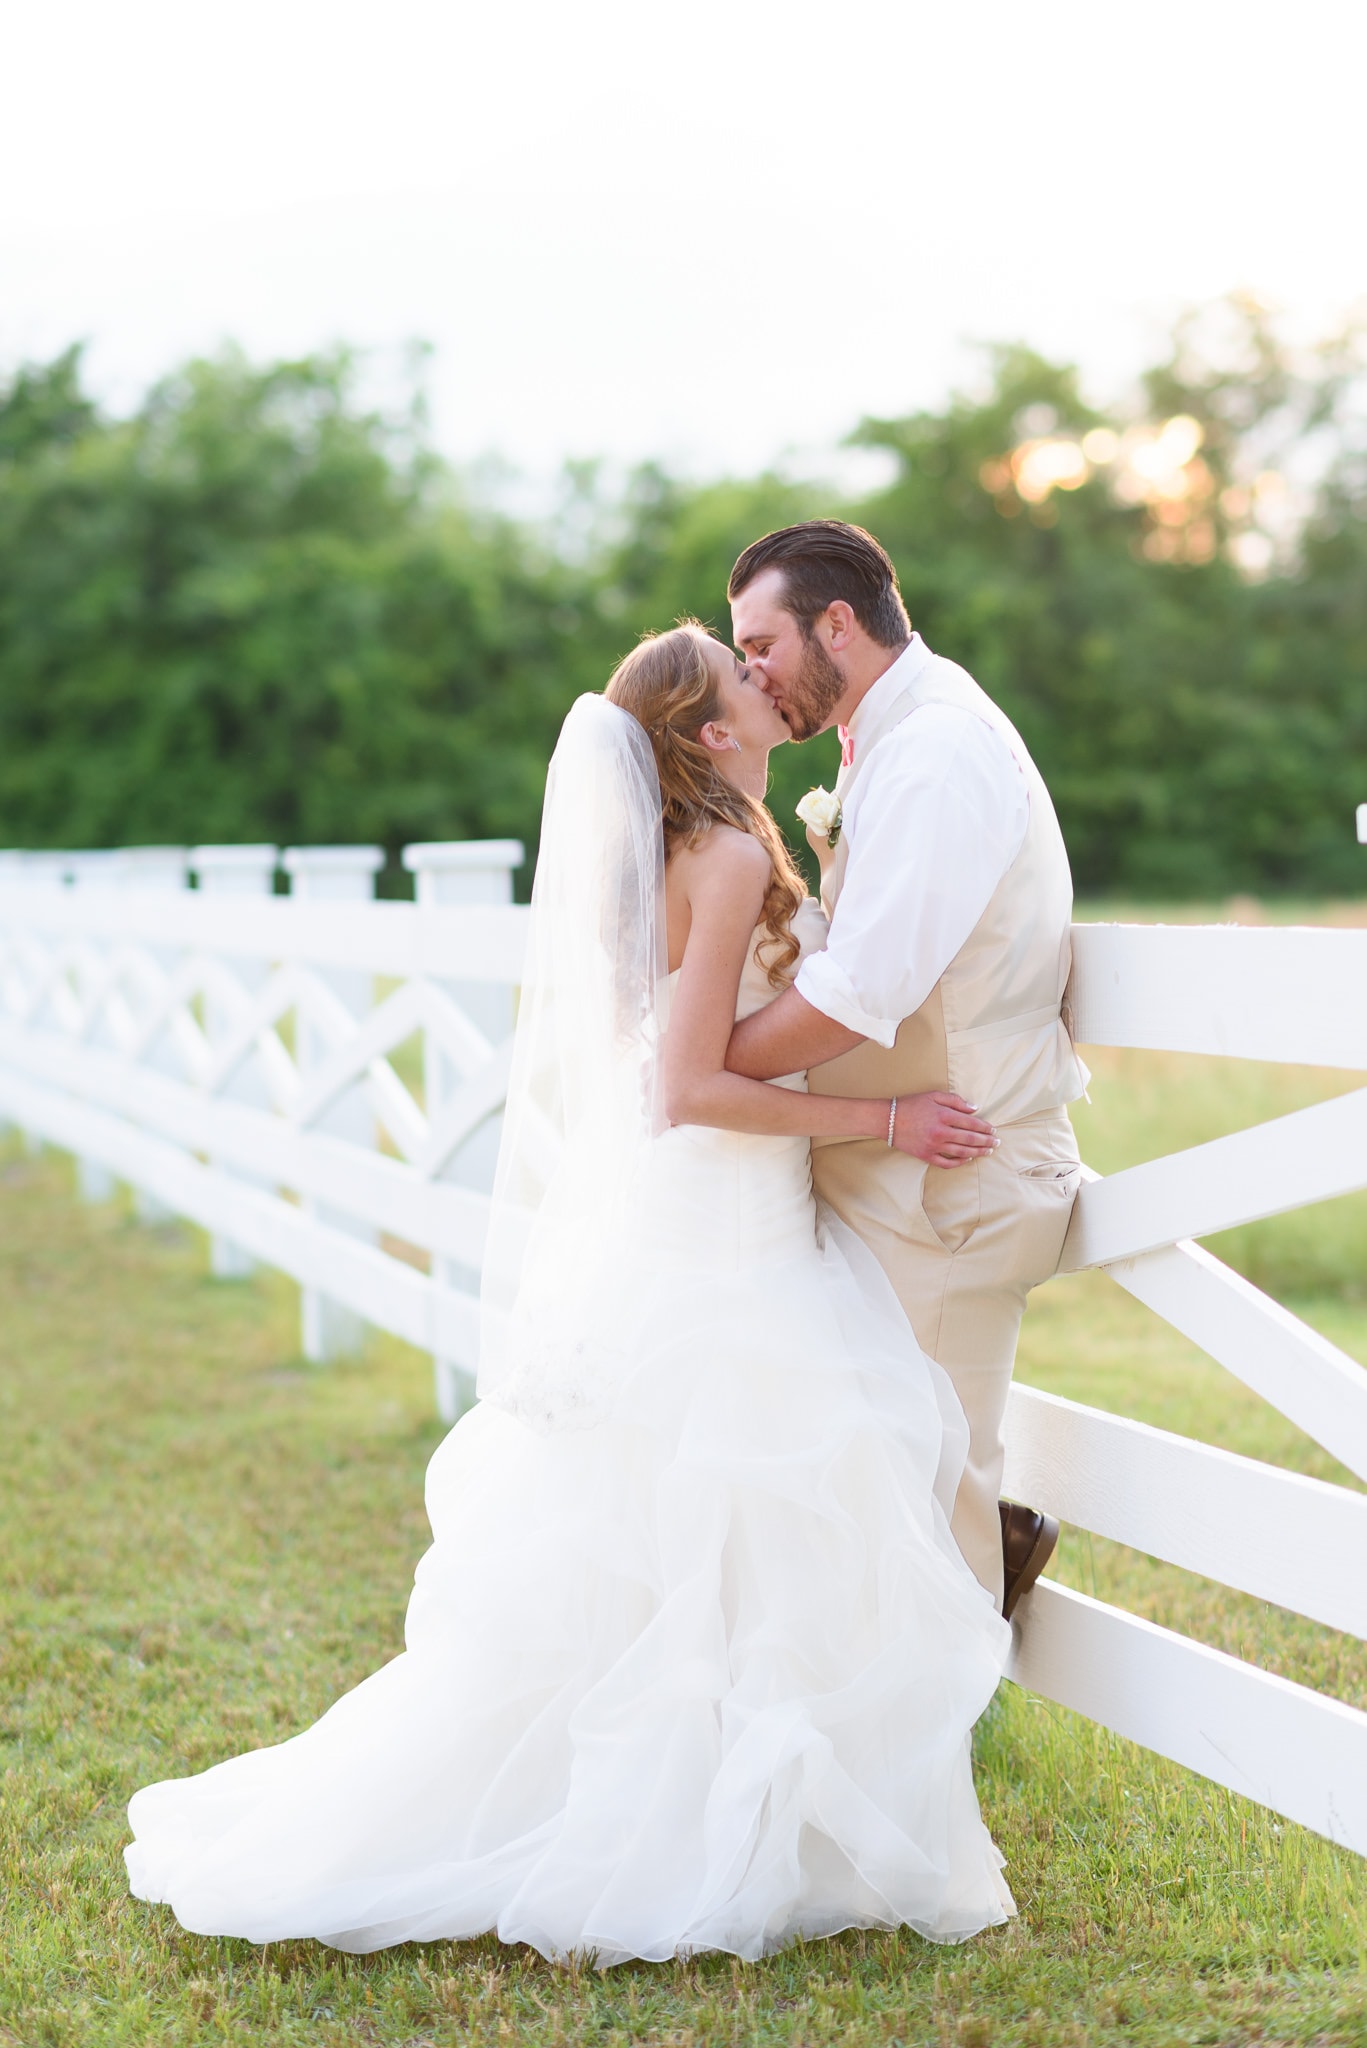 Bride and groom kissing against a white fence - Wildberry Farm